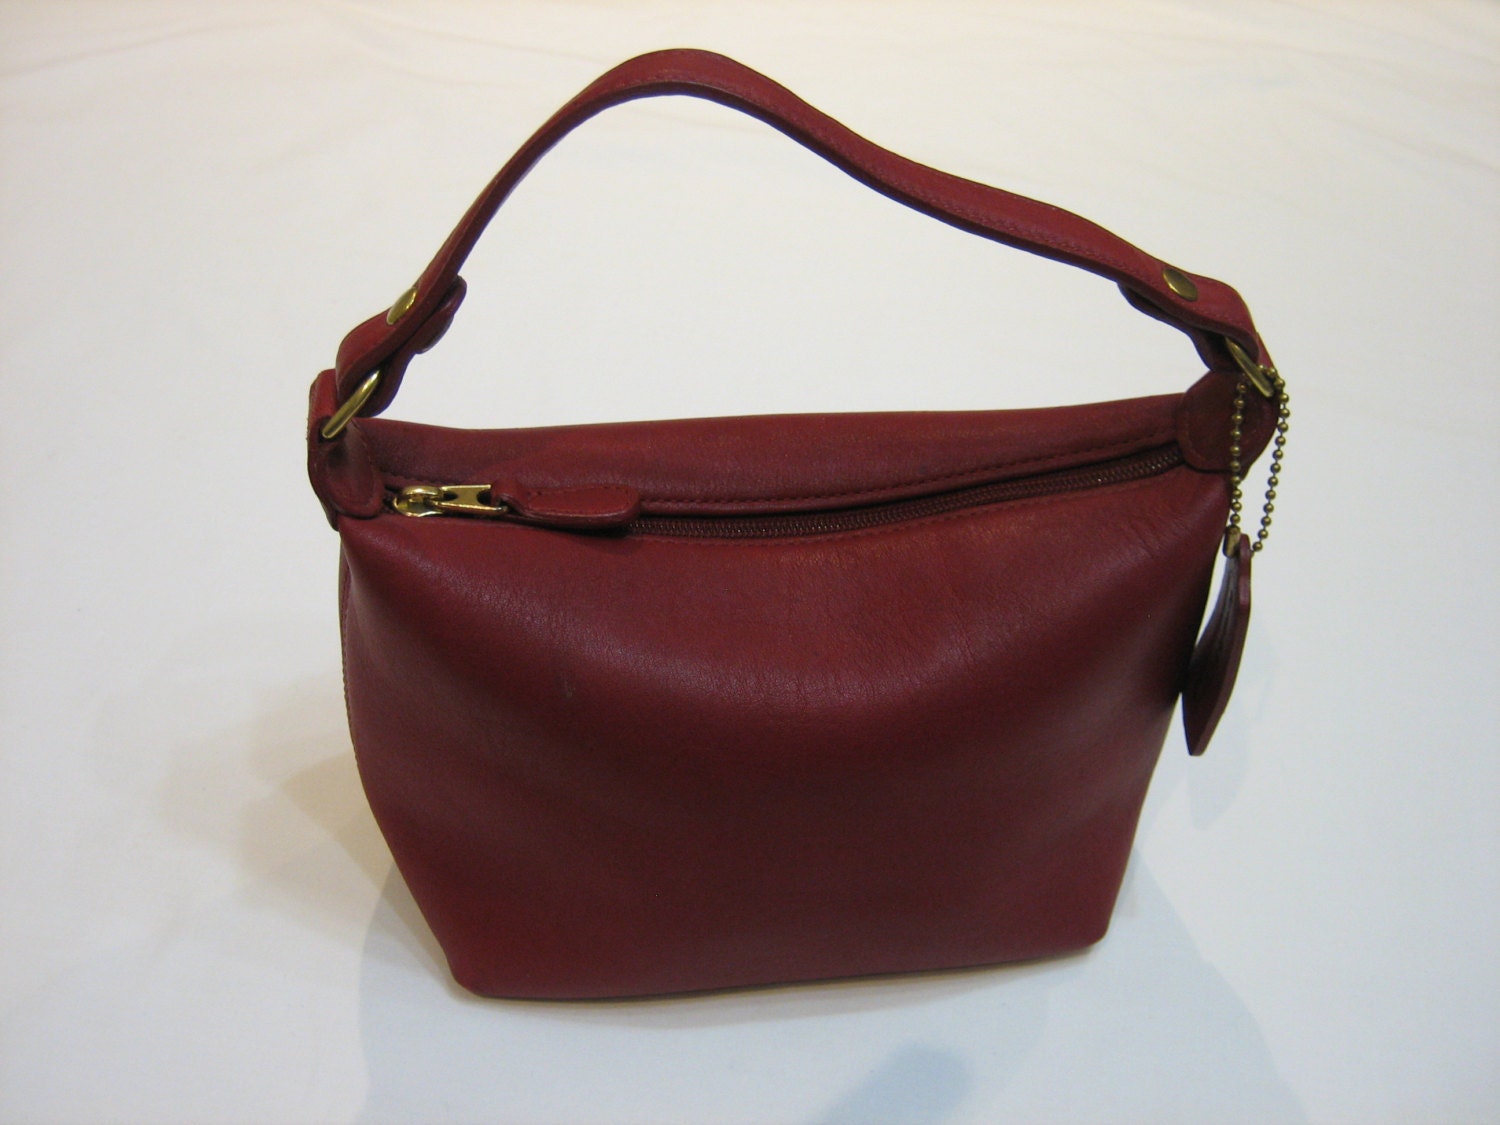 Vintage Coach Red Leather Zip Top Handbag Purse by CLASSYBAG